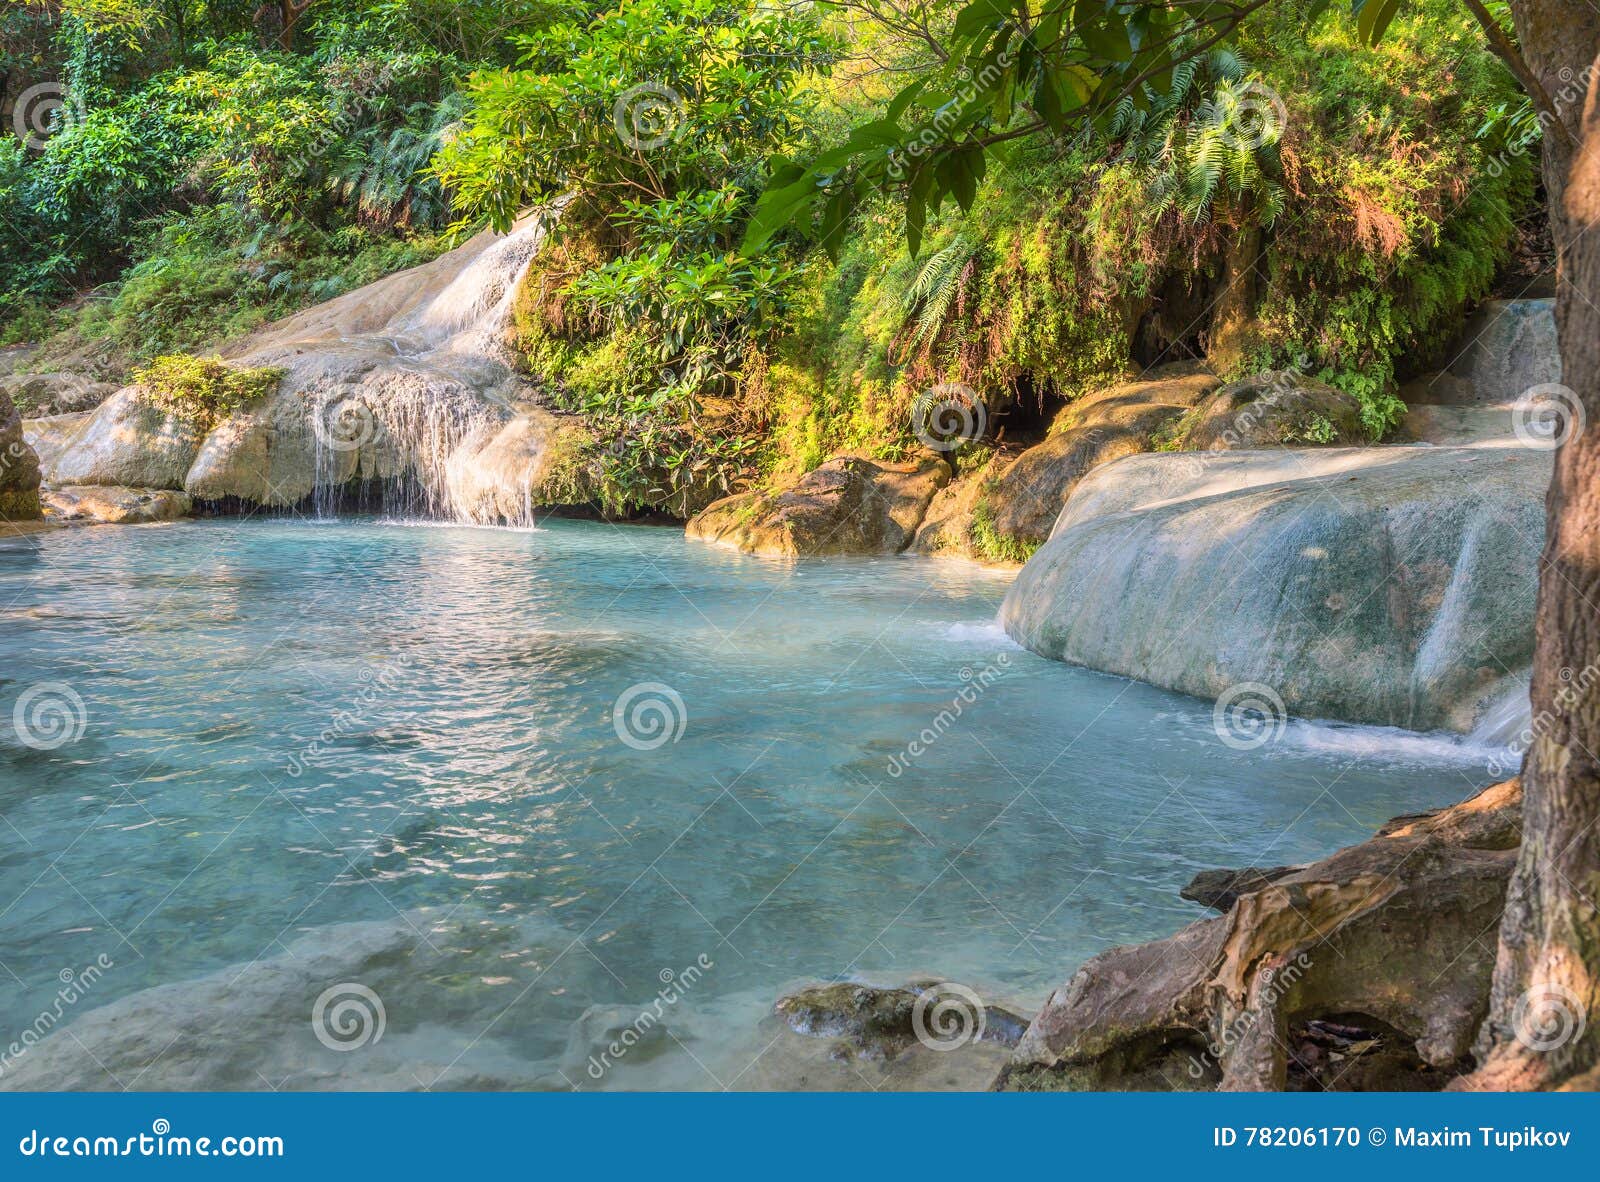 jangle landscape with flowing turquoise water of erawan